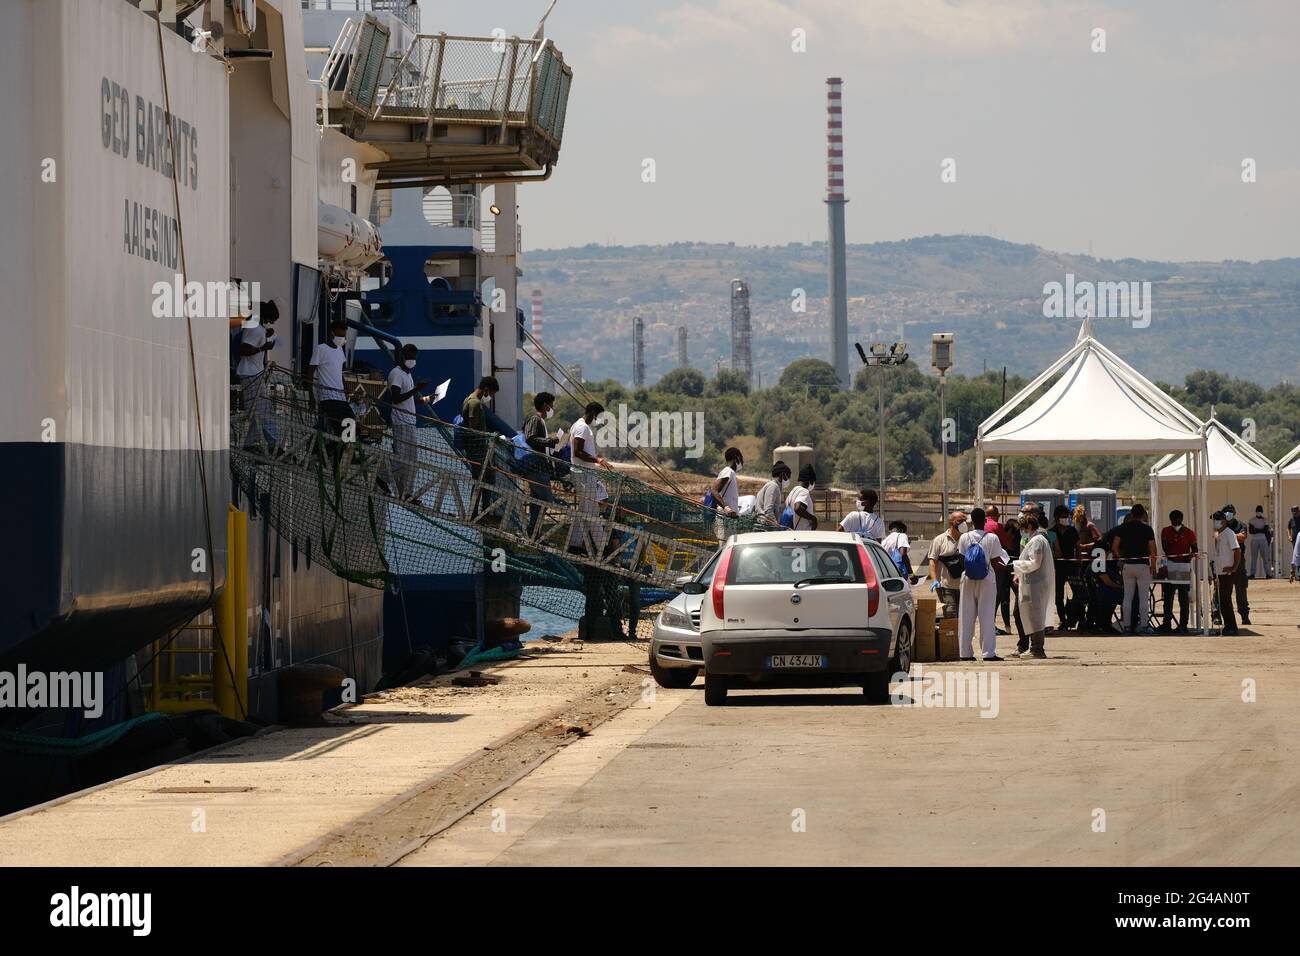 AUGUSTA, SICILY, ITALY – JUNE 18: 415 migrants rescued by Geo Barents vessel of Doctors Without Borders arrived in Augusta for disembarkation on 2021 in Sicily. 'In less than 48 hours, seven rescues and 410 persons saved from drowning,' tweeted the humanitarian organization Doctors without Borders (MSF) on Saturday, June 12. Among those rescued are women and children.The Geo Barents is the largest search-and-rescue ship of the six the NGO has worked with until now. It has capacity for 300 people and is carrying a ton of medicines, 1,200 blankets and 12.5 tons of food. Stock Photo